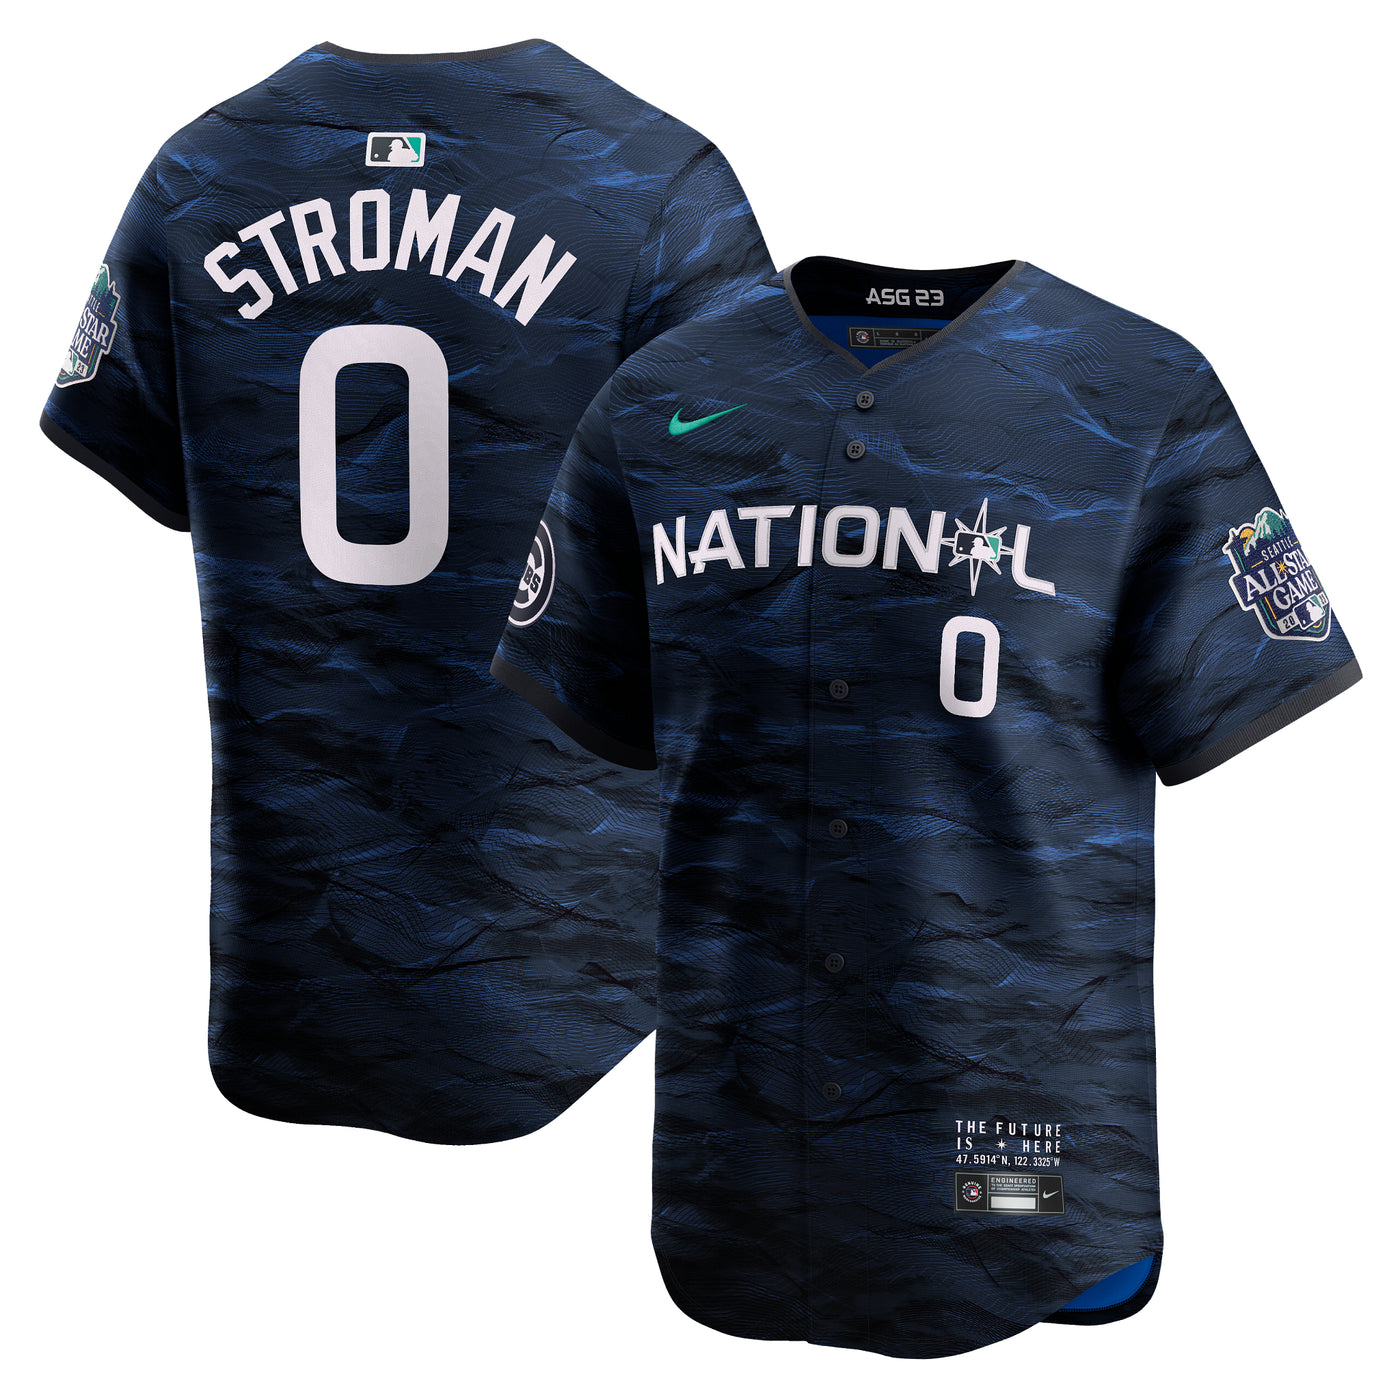 CHICAGO CUBS STROMAN ALL STAR GAME 2023 JERSEY